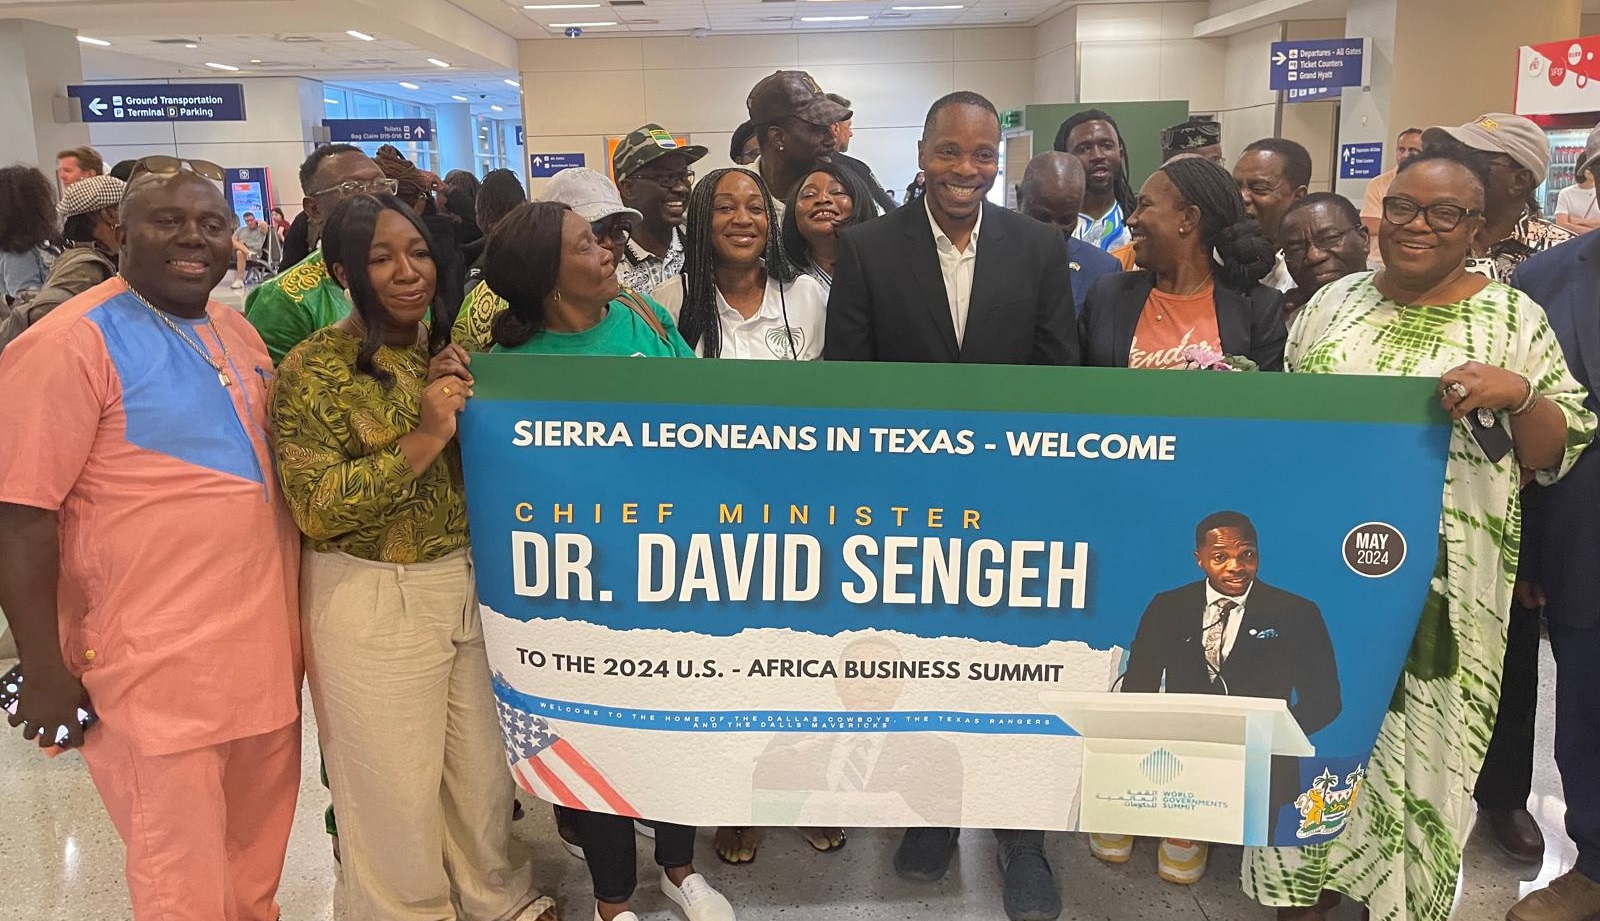 Chief Minister Sengeh Leads Sierra Leone’s Delegation to U.S.-Africa Business Summit in Texas